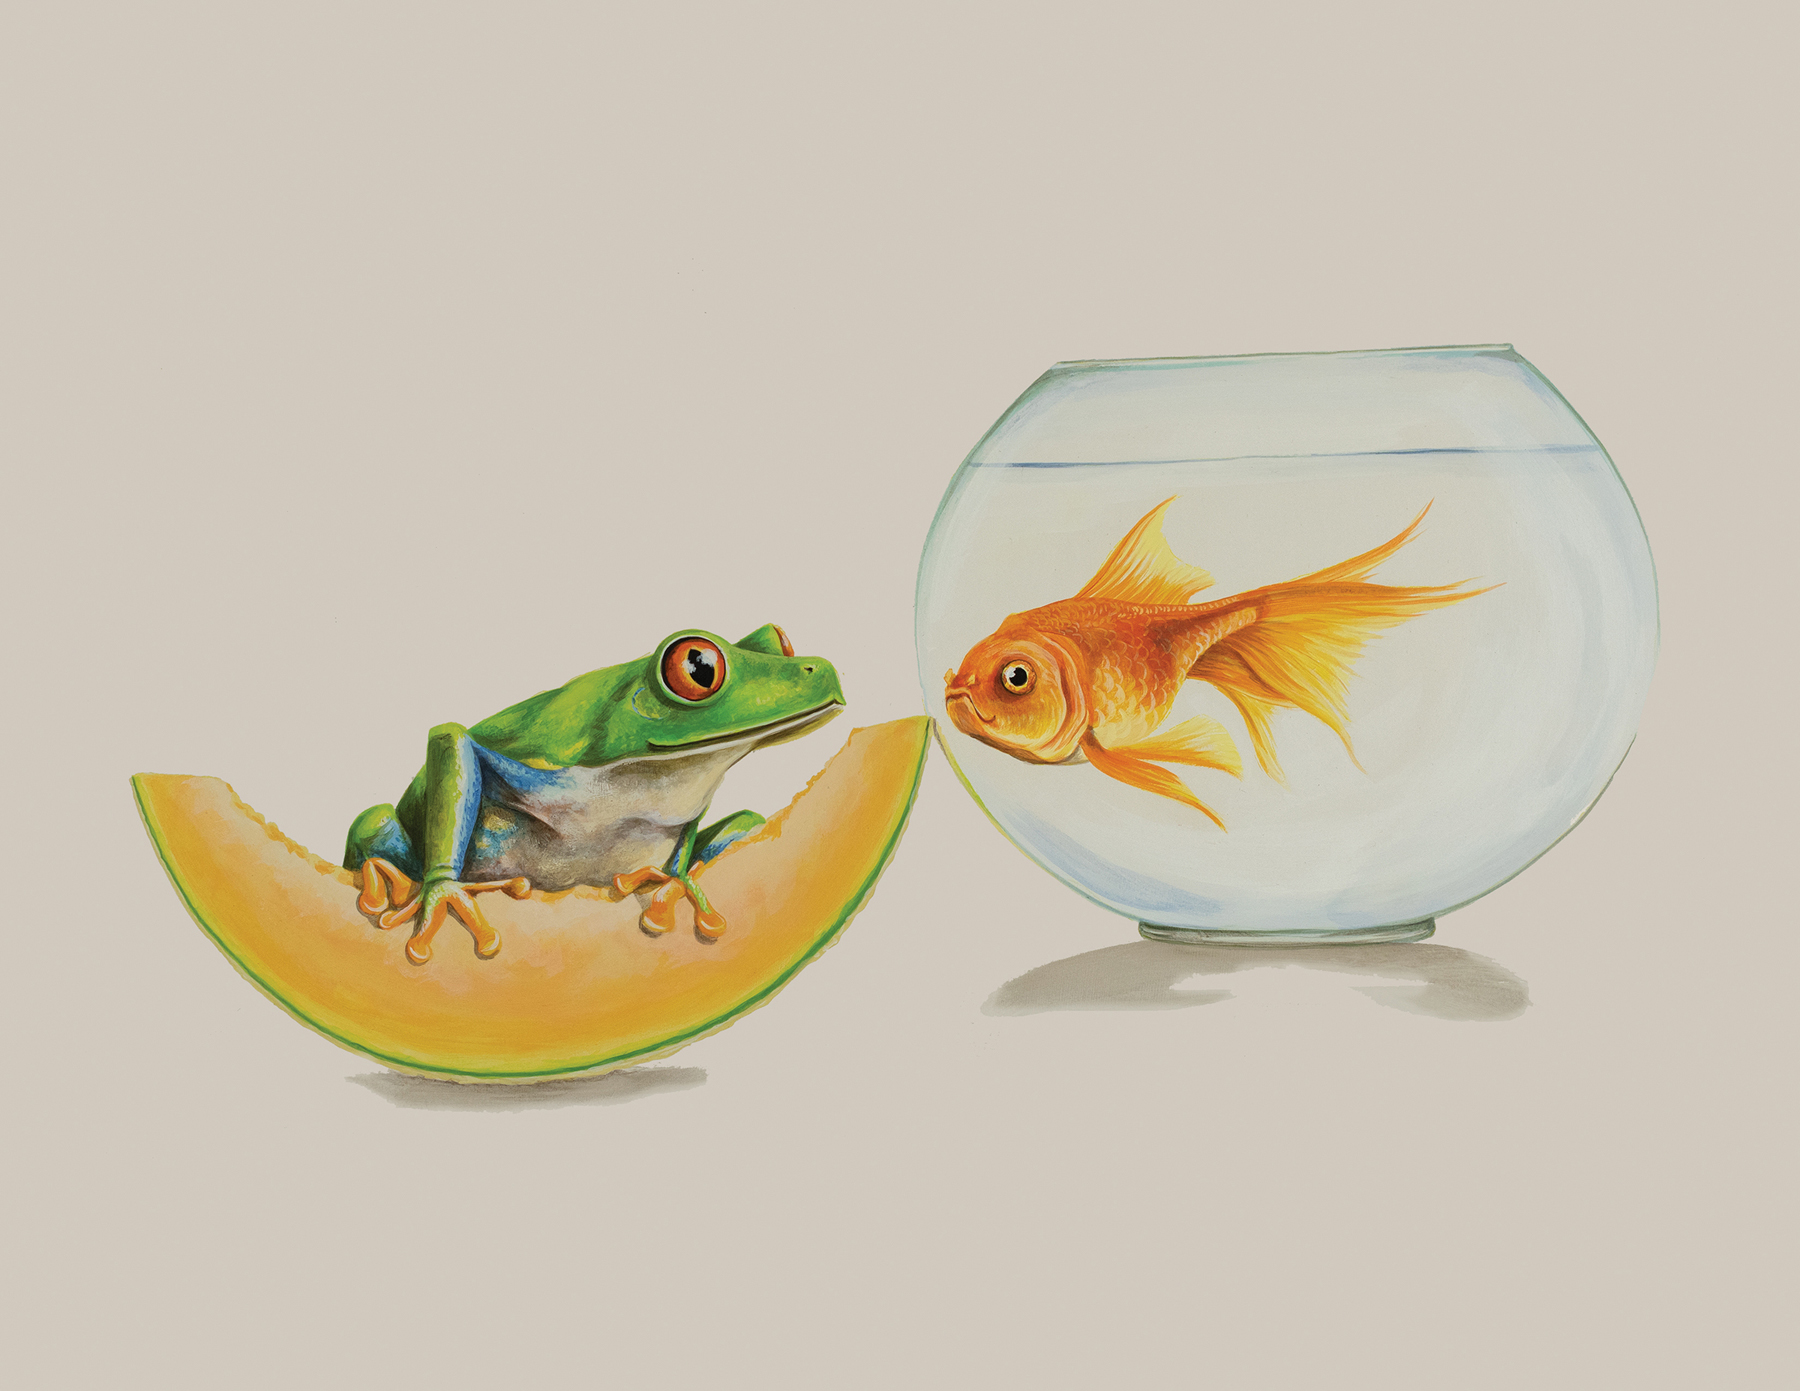 Tricia George: The Frog and the Goldfish